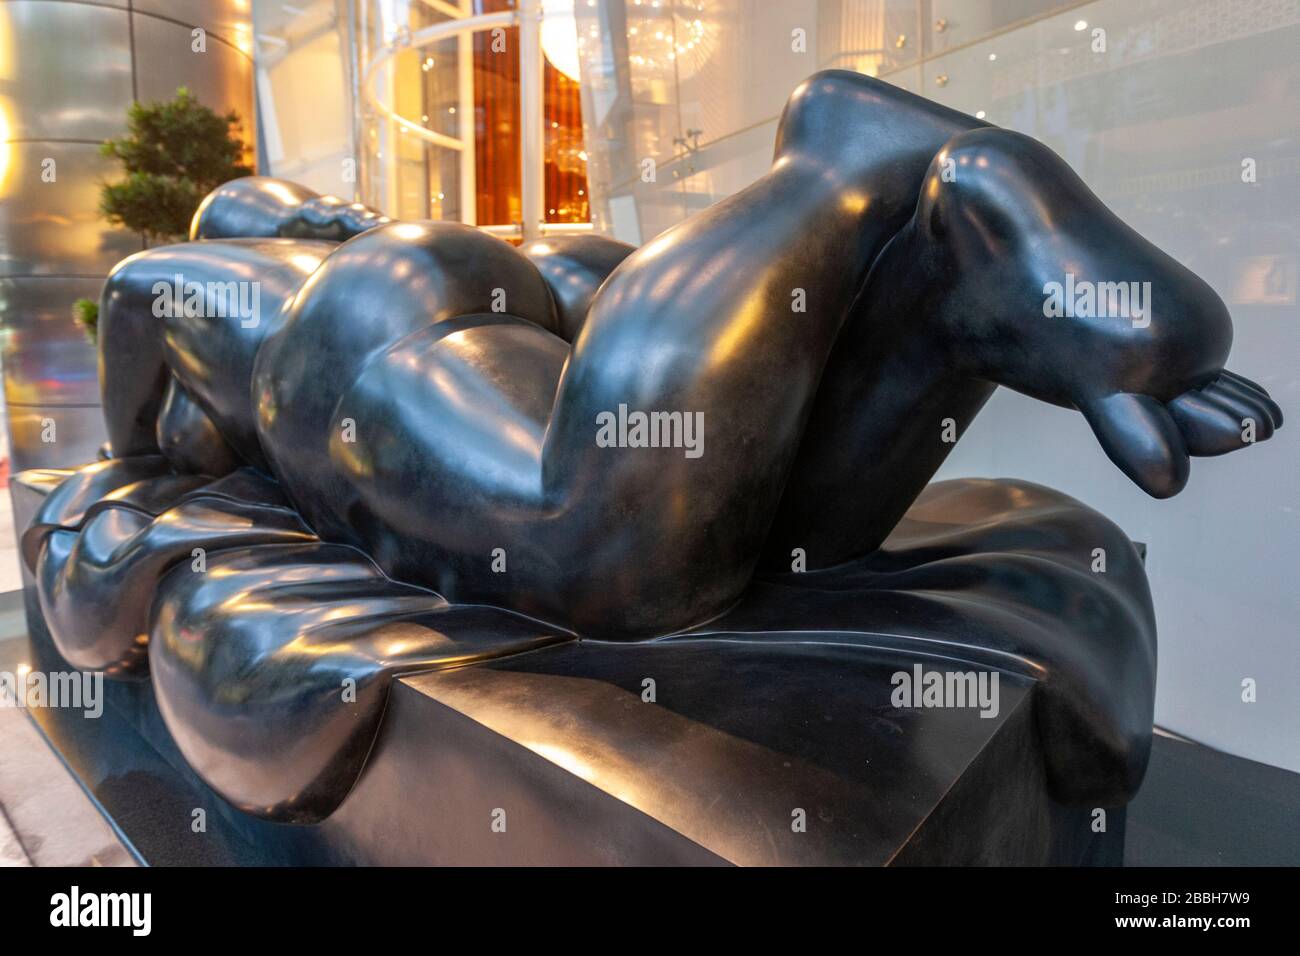 Monumental sculpture of a reclining woman by Fernando Botero, display at the St Regis Hotel, Singapore Stock Photo